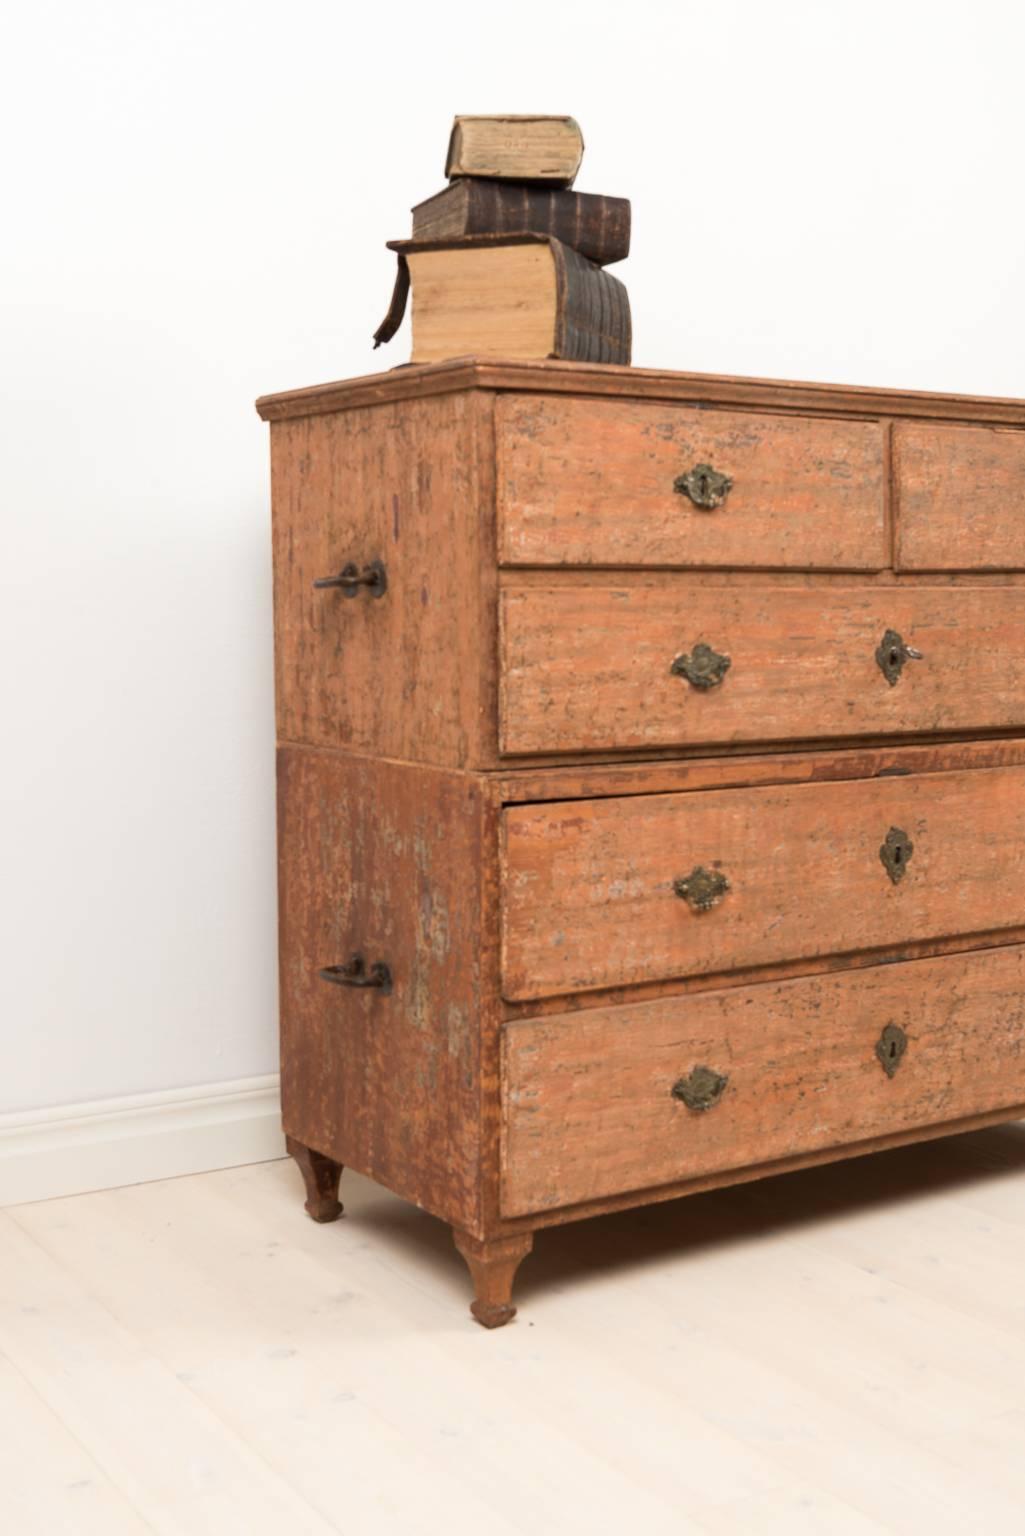 The chest of drawers is two pieced and has been dry scraped to original paint. Lock, key and hardware are original for the bureau and are from the late 1700s.